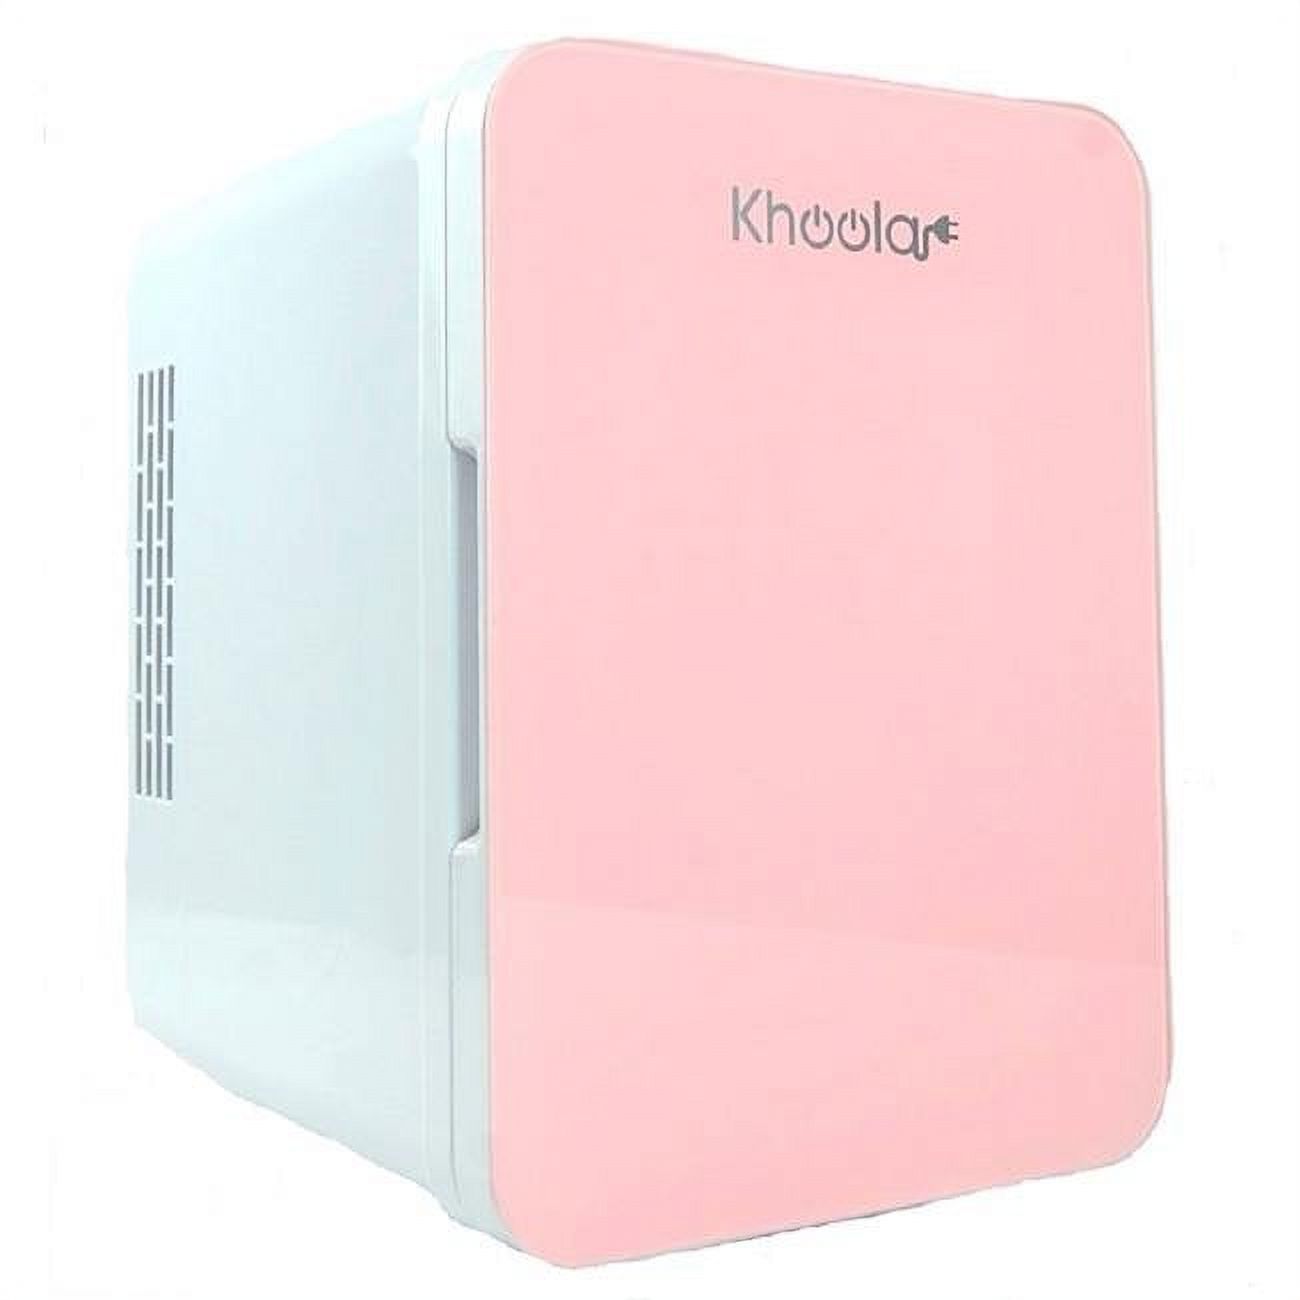 Xtrempro PC01-04PK 4 liter Portable Cooler & Warmer Compact Mini Refrigerator with Eraser Door Board,, Pink - image 1 of 5